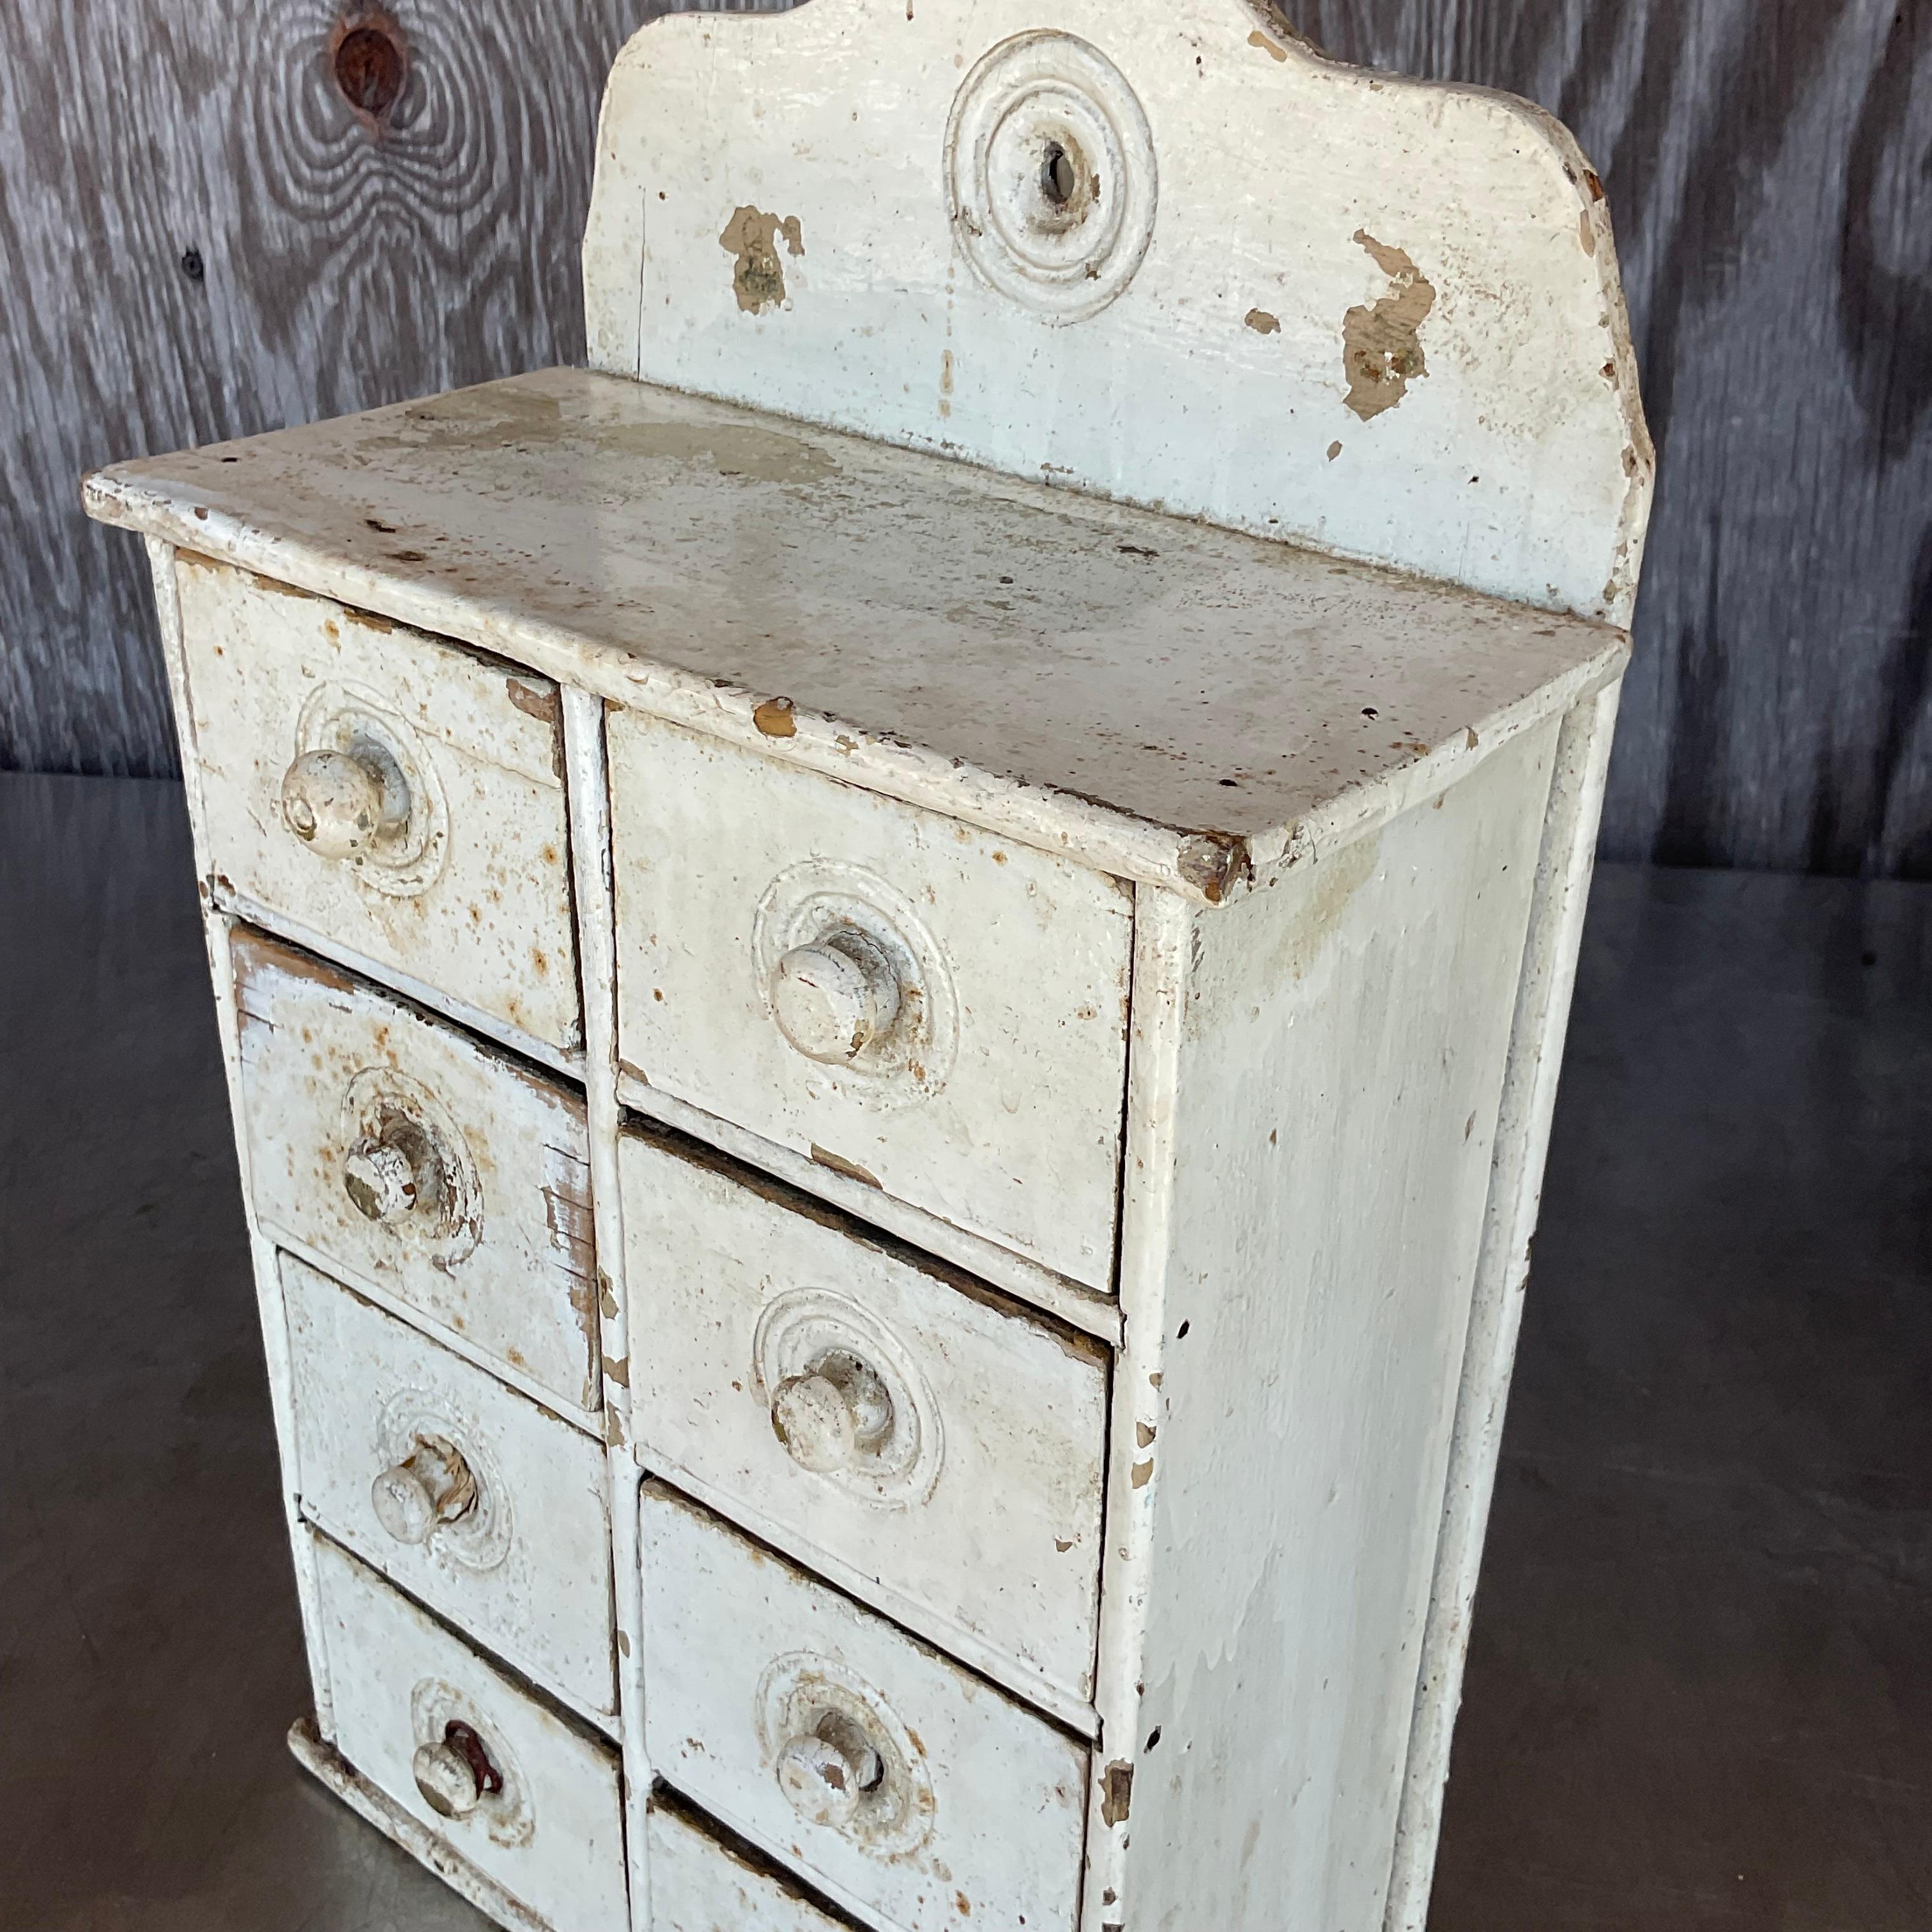 Crafted with rustic charm and aged character, this Antique Primitive Patinated Wall Cabinet embodies quintessential American style. Perfect for adding a touch of heritage to any space, its weathered patina tells a story of bygone eras and timeless